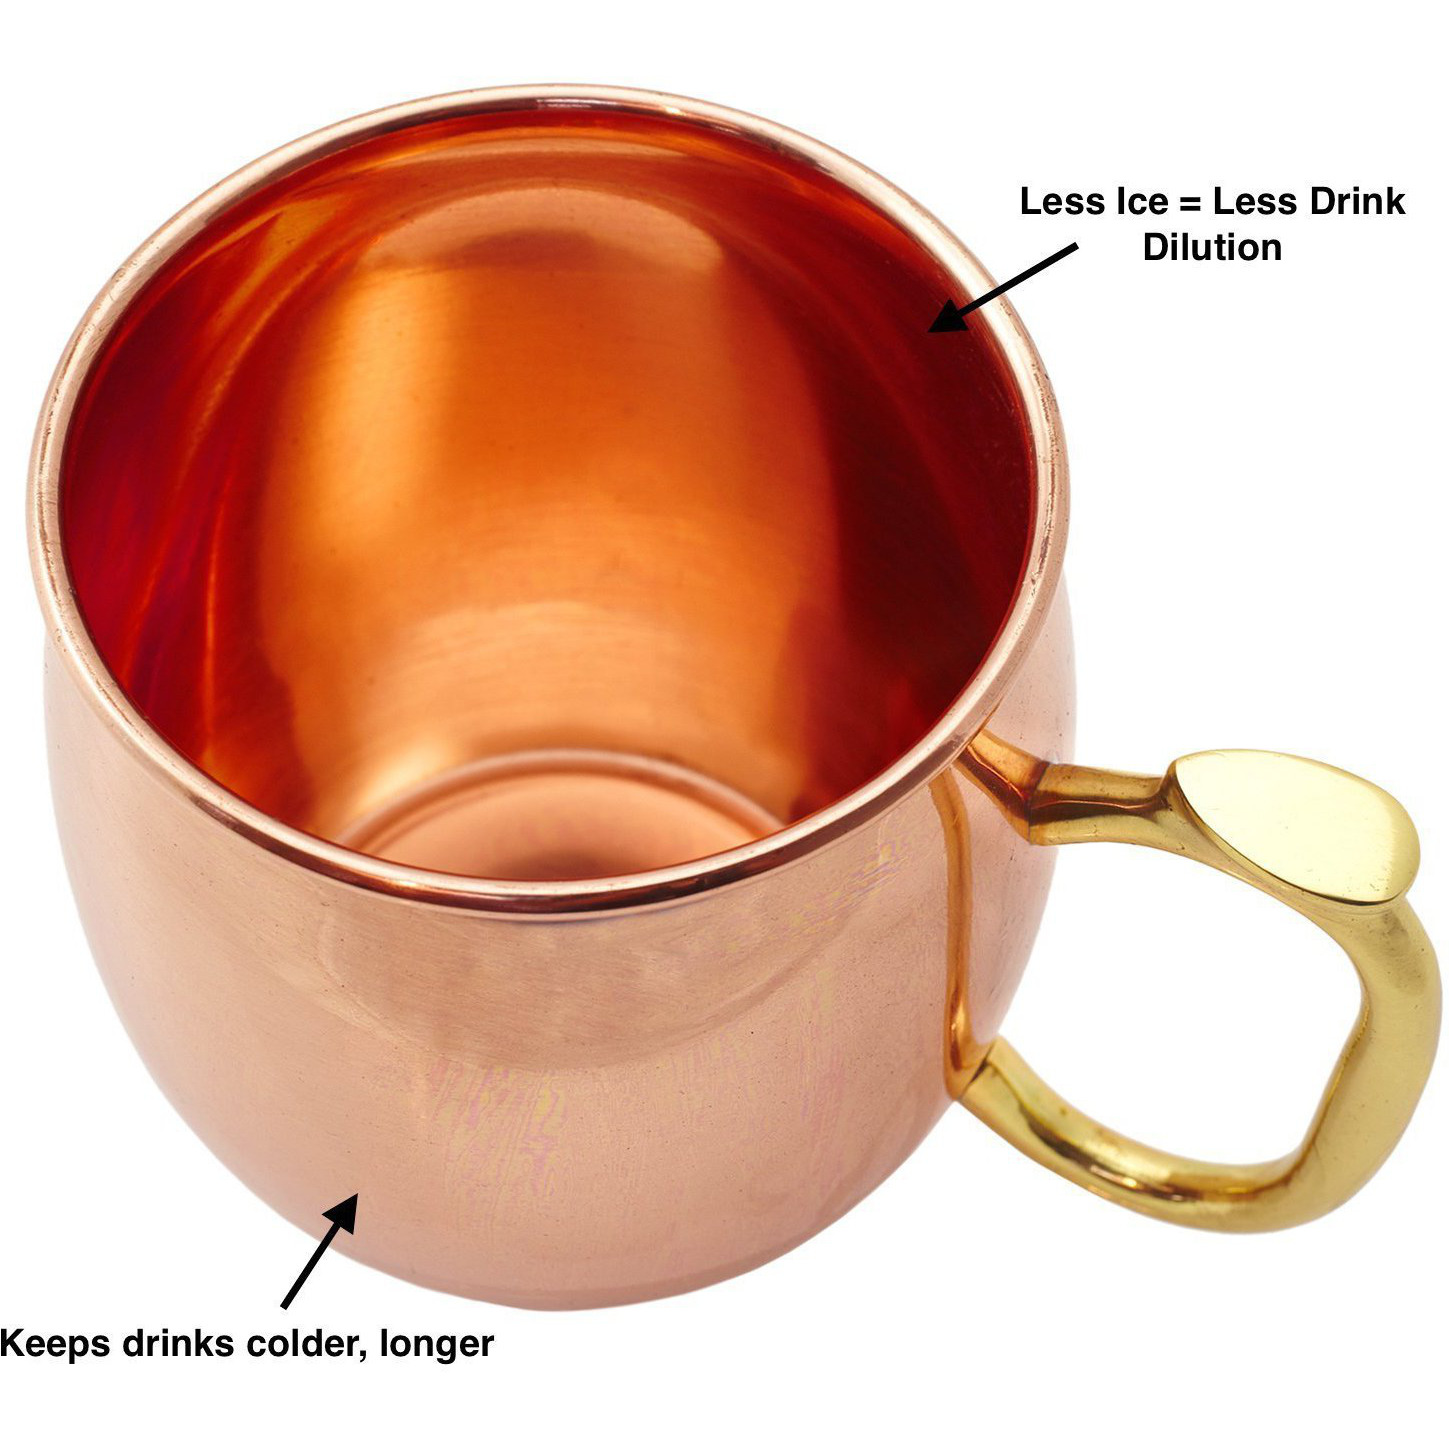 Set of 4 - Prisha India Craft B. Pure Copper Moscow Mules Copper Mug with Thumb Handle 475 ML / 16 oz - Cocktail Cup - Christmas Gift Bonus with WOODEN KEYRING, Copper Straw, Beaded Coaster